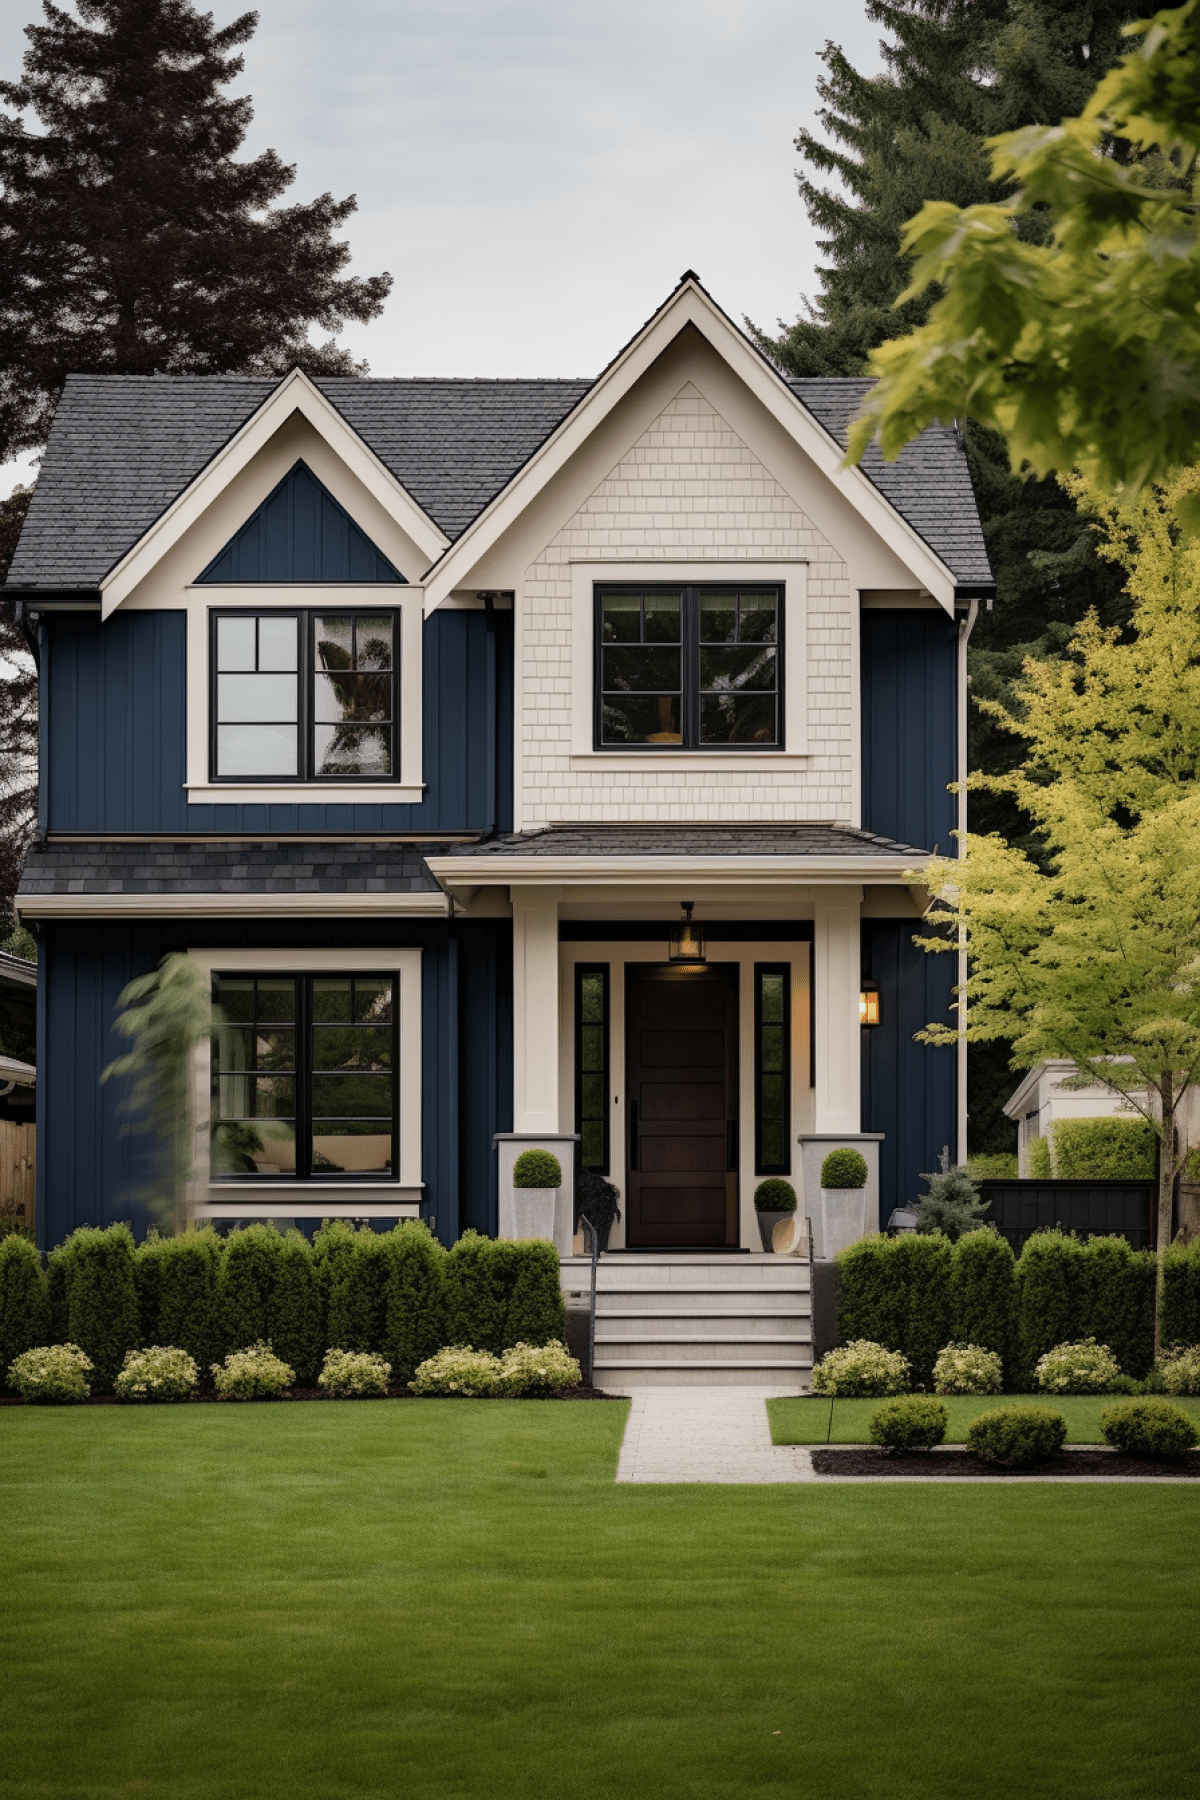 Stylish Choices for Exterior House Colors